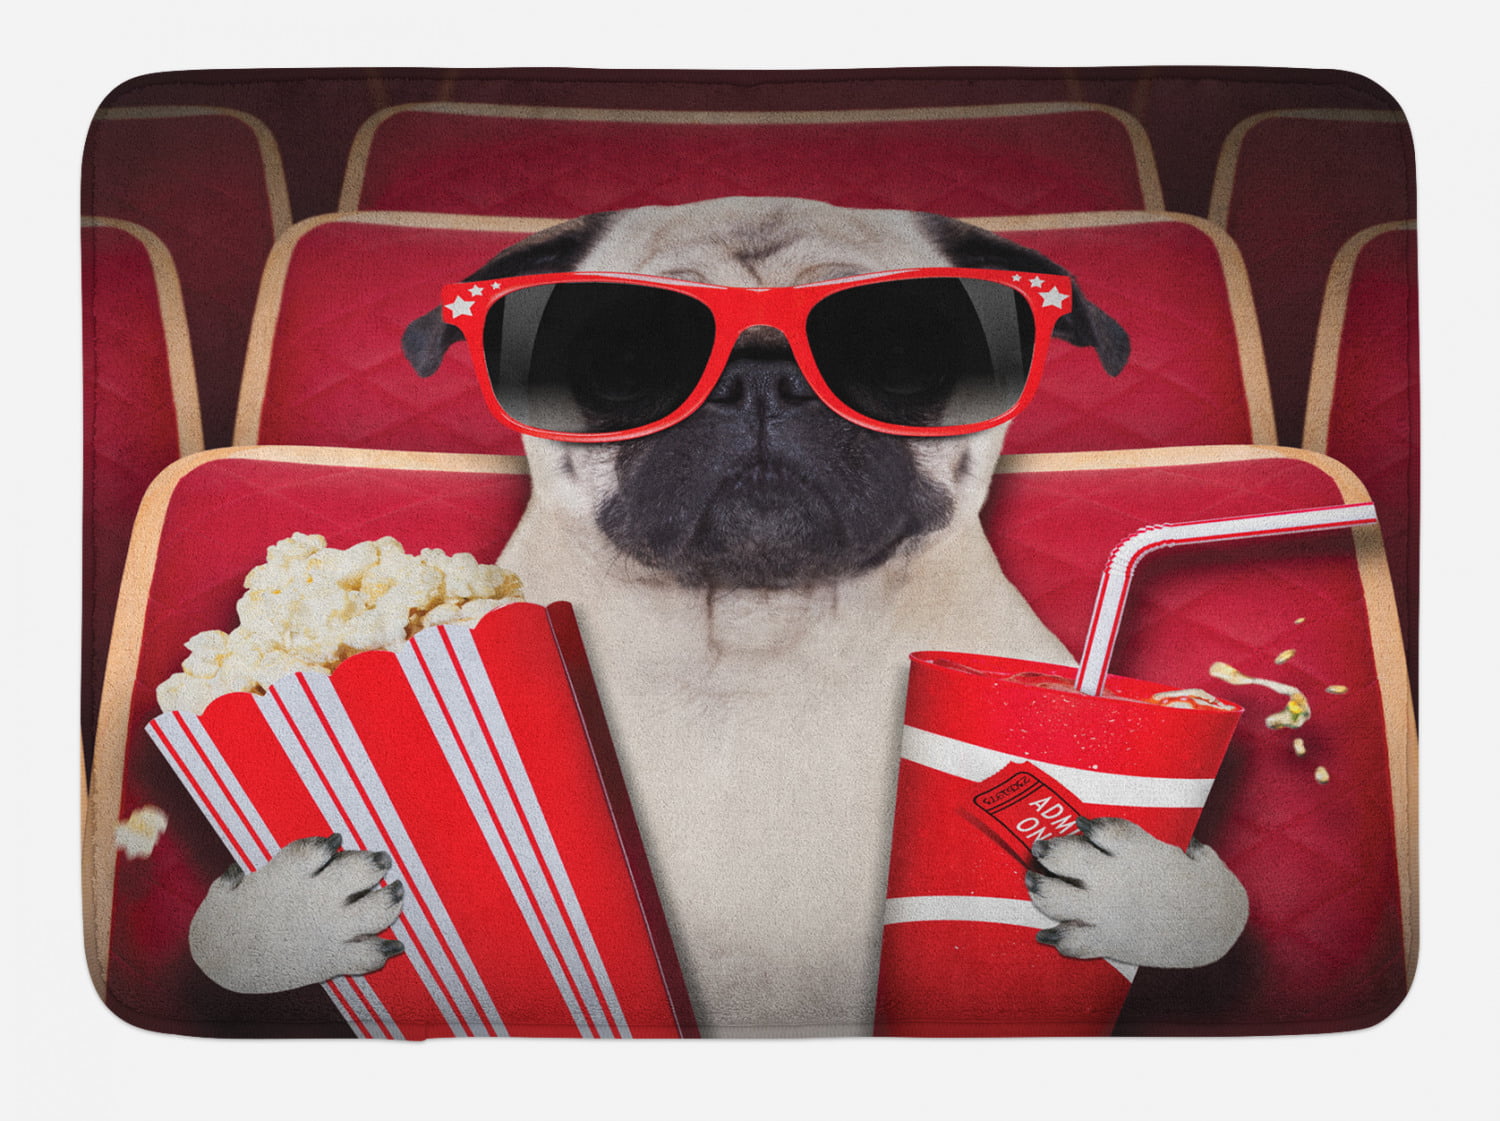 Pug Bath Mat, Funny Dog Watching Movie Popcorn Soft Drink and Glasses Animal  Photograph Print, Non-Slip Plush Mat Bathroom Kitchen Laundry Room Decor,   X  Inches, Red Cream Ruby, Ambesonne -